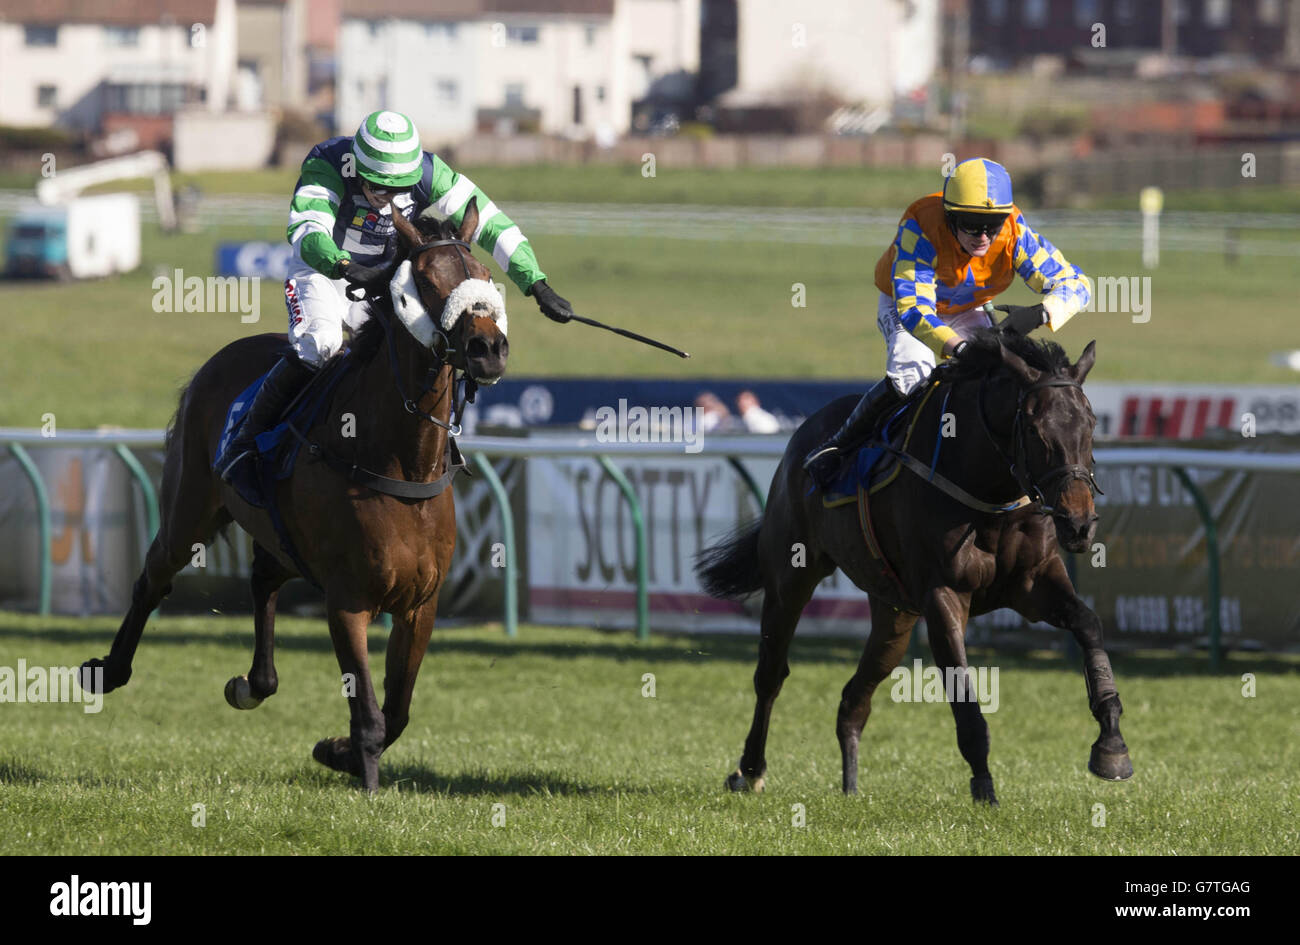 Rascal ridden by Harry Skelton (left) on their way to winning the Ayrshire Hospice Making Today Matter Handicap Hurdle during the 2015 Coral Scottish Grand National Festival at Ayr Racecourse. Stock Photo